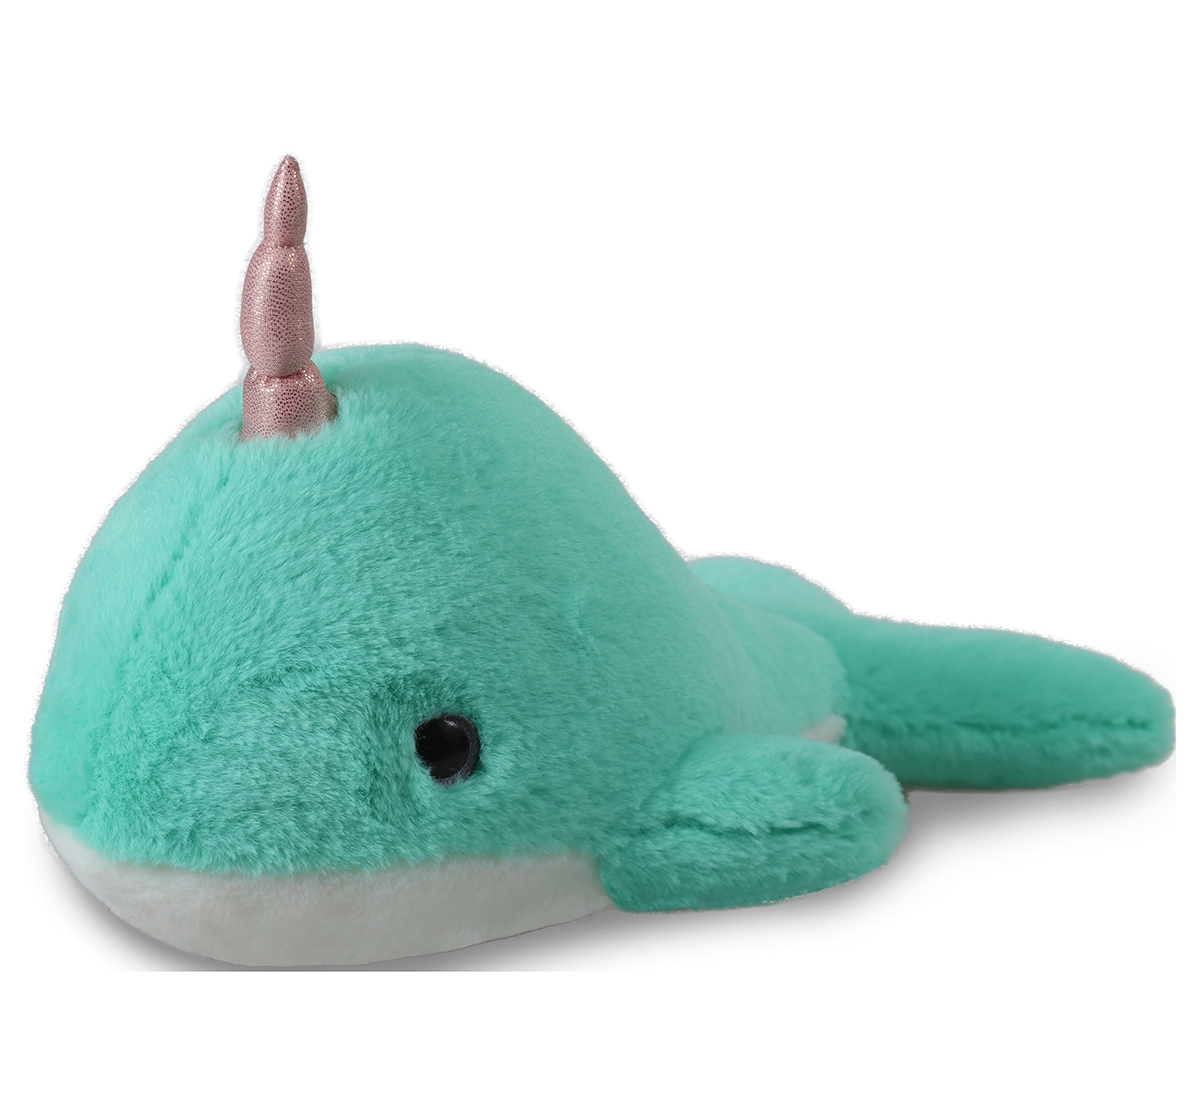 Mirada | Adorable Stuffed Plush Narwhal by Mirada, Soft Toys for Kids of All Ages, 3Y+, Green, 40cm